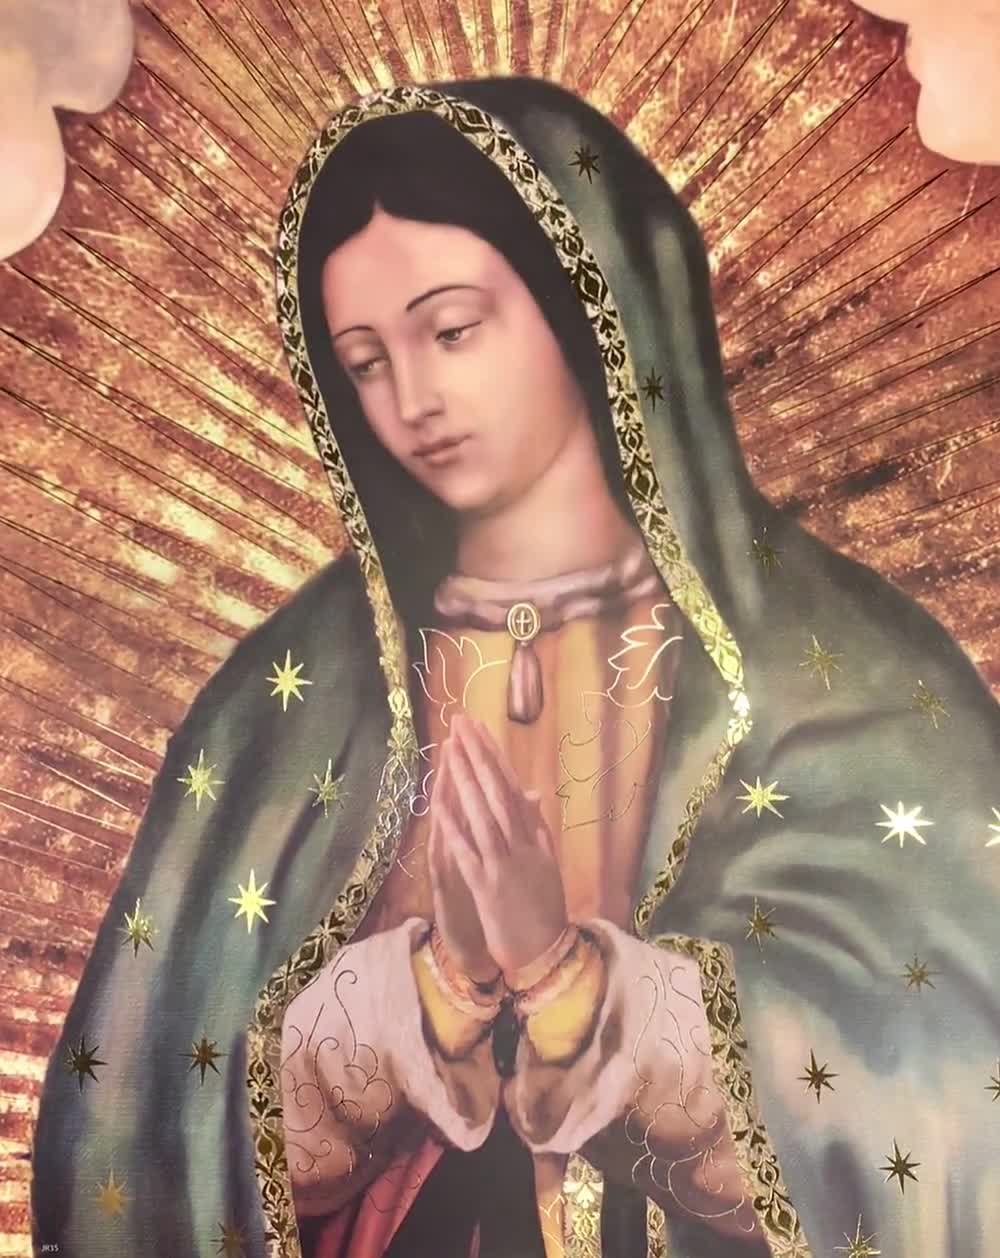 Our Lady of Guadalupe Virgin Mary Religious Art Prints That GLOW